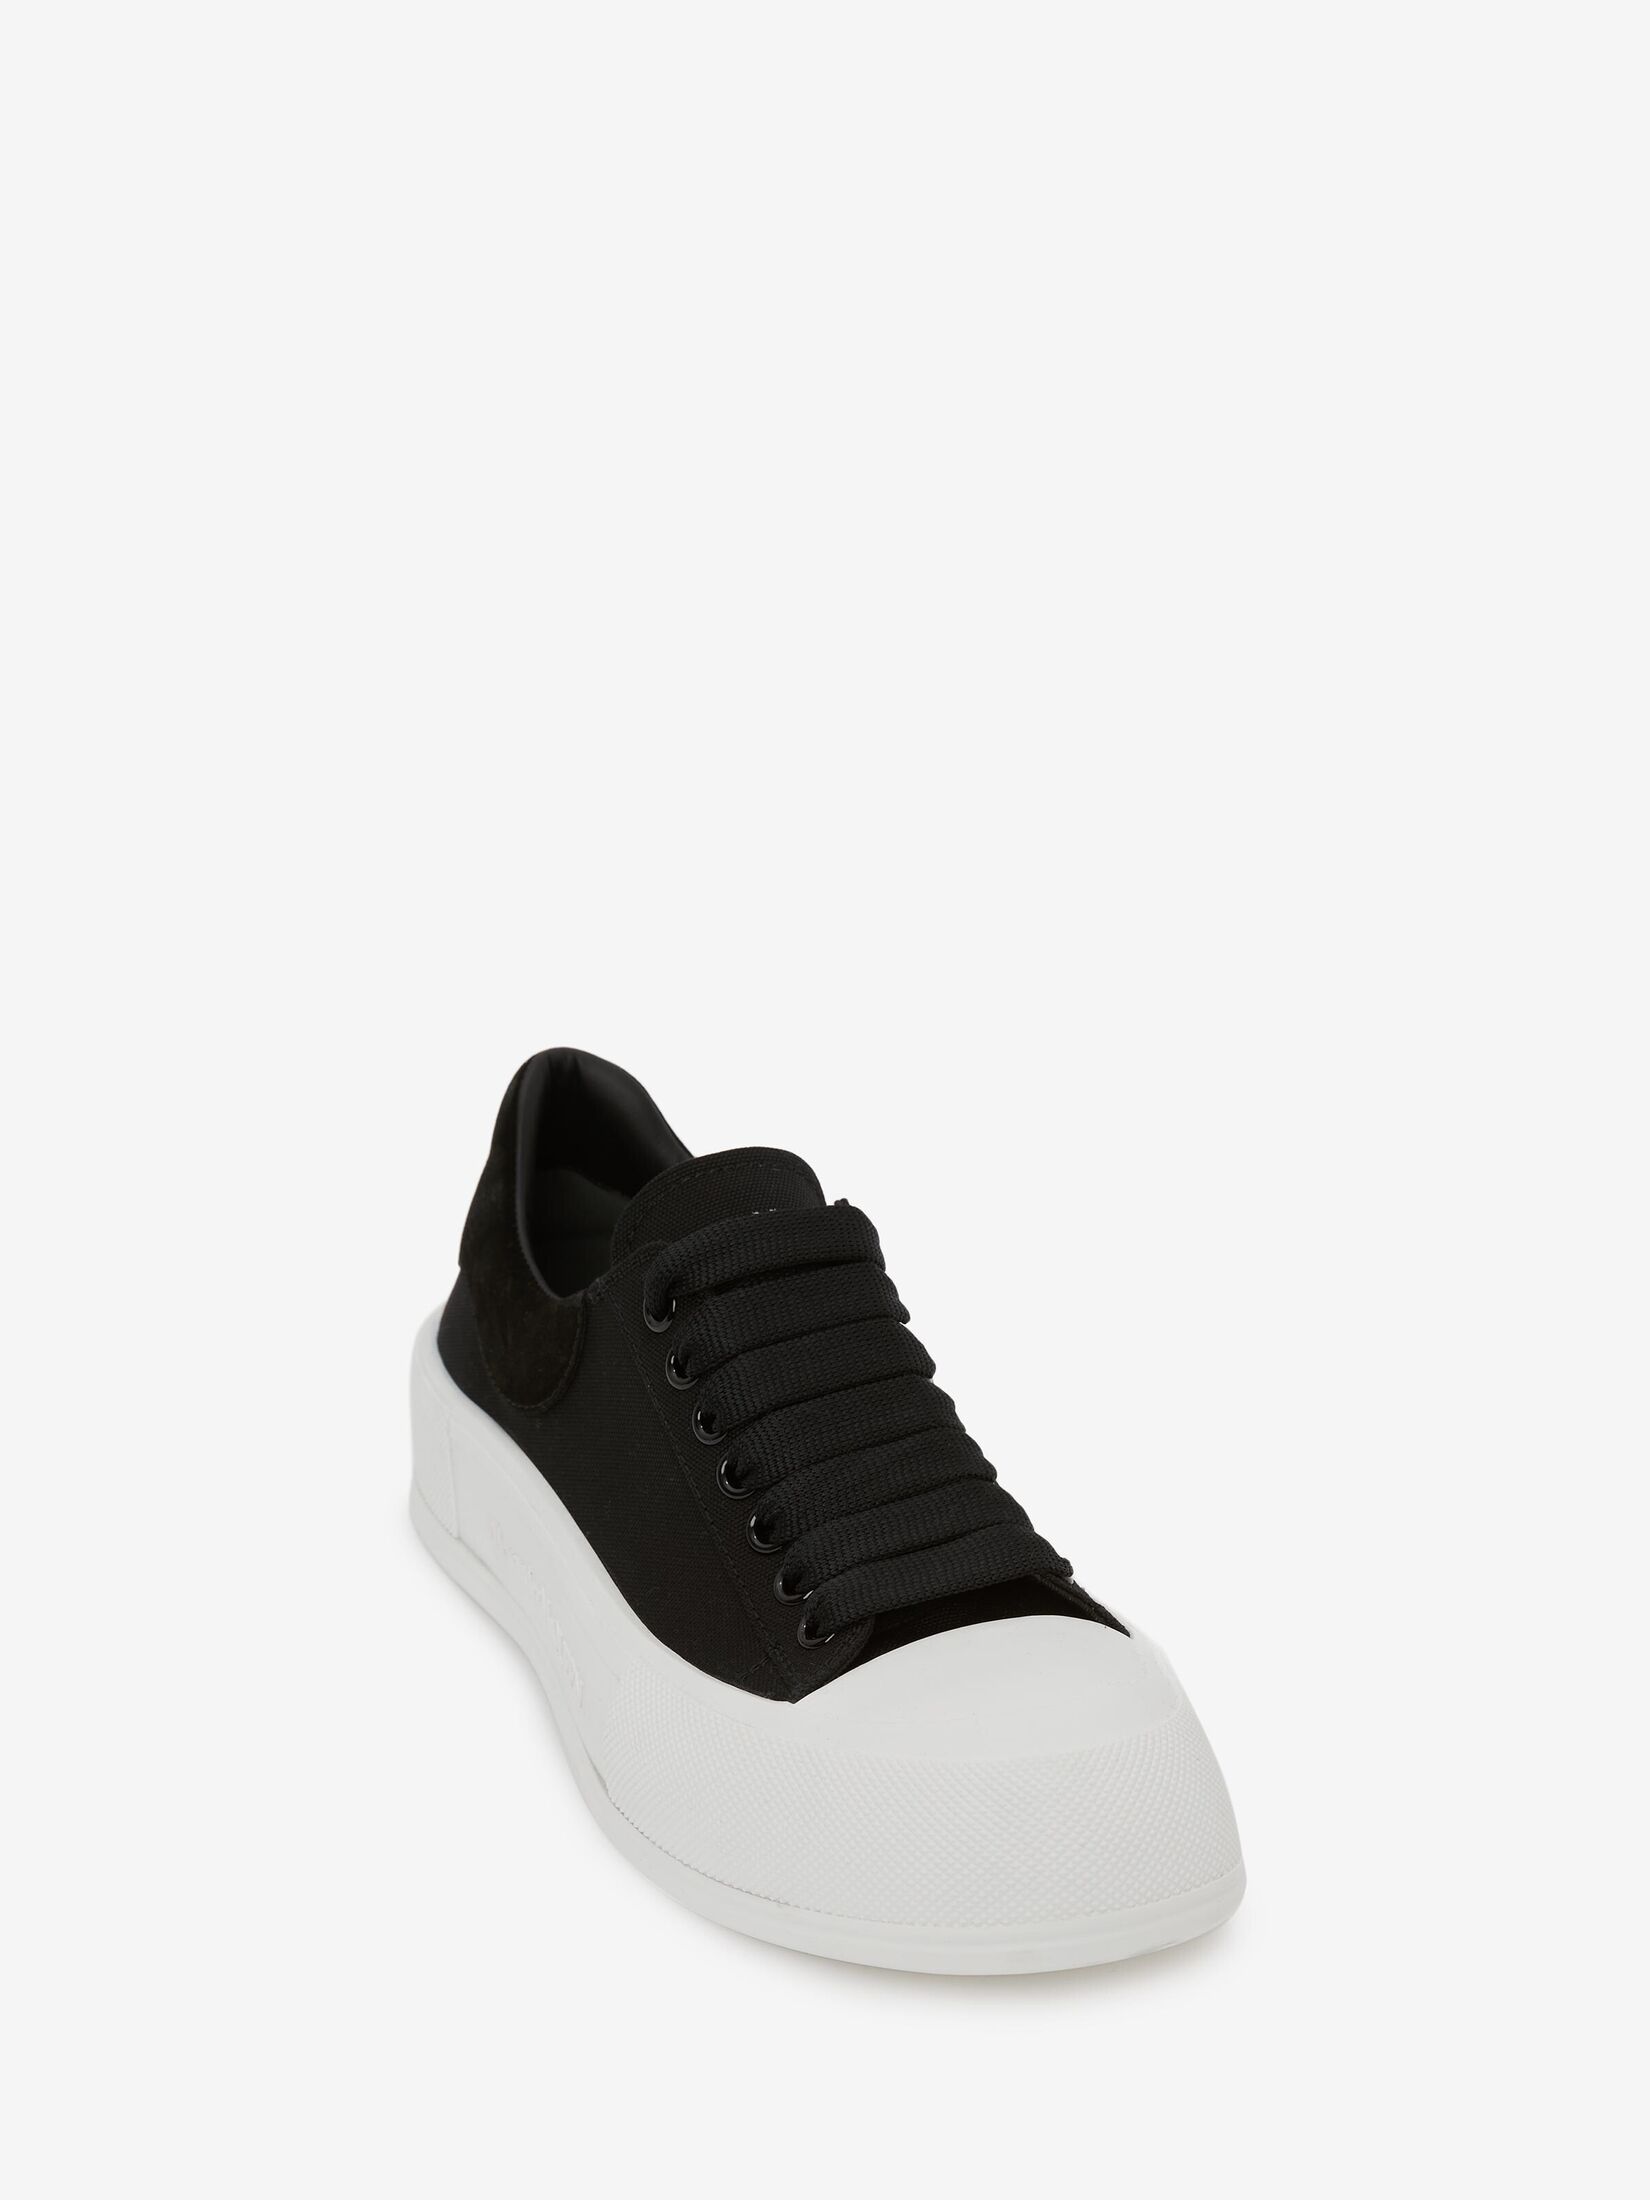 Deck Lace Up Plimsoll in Black/White | Alexander McQueen US